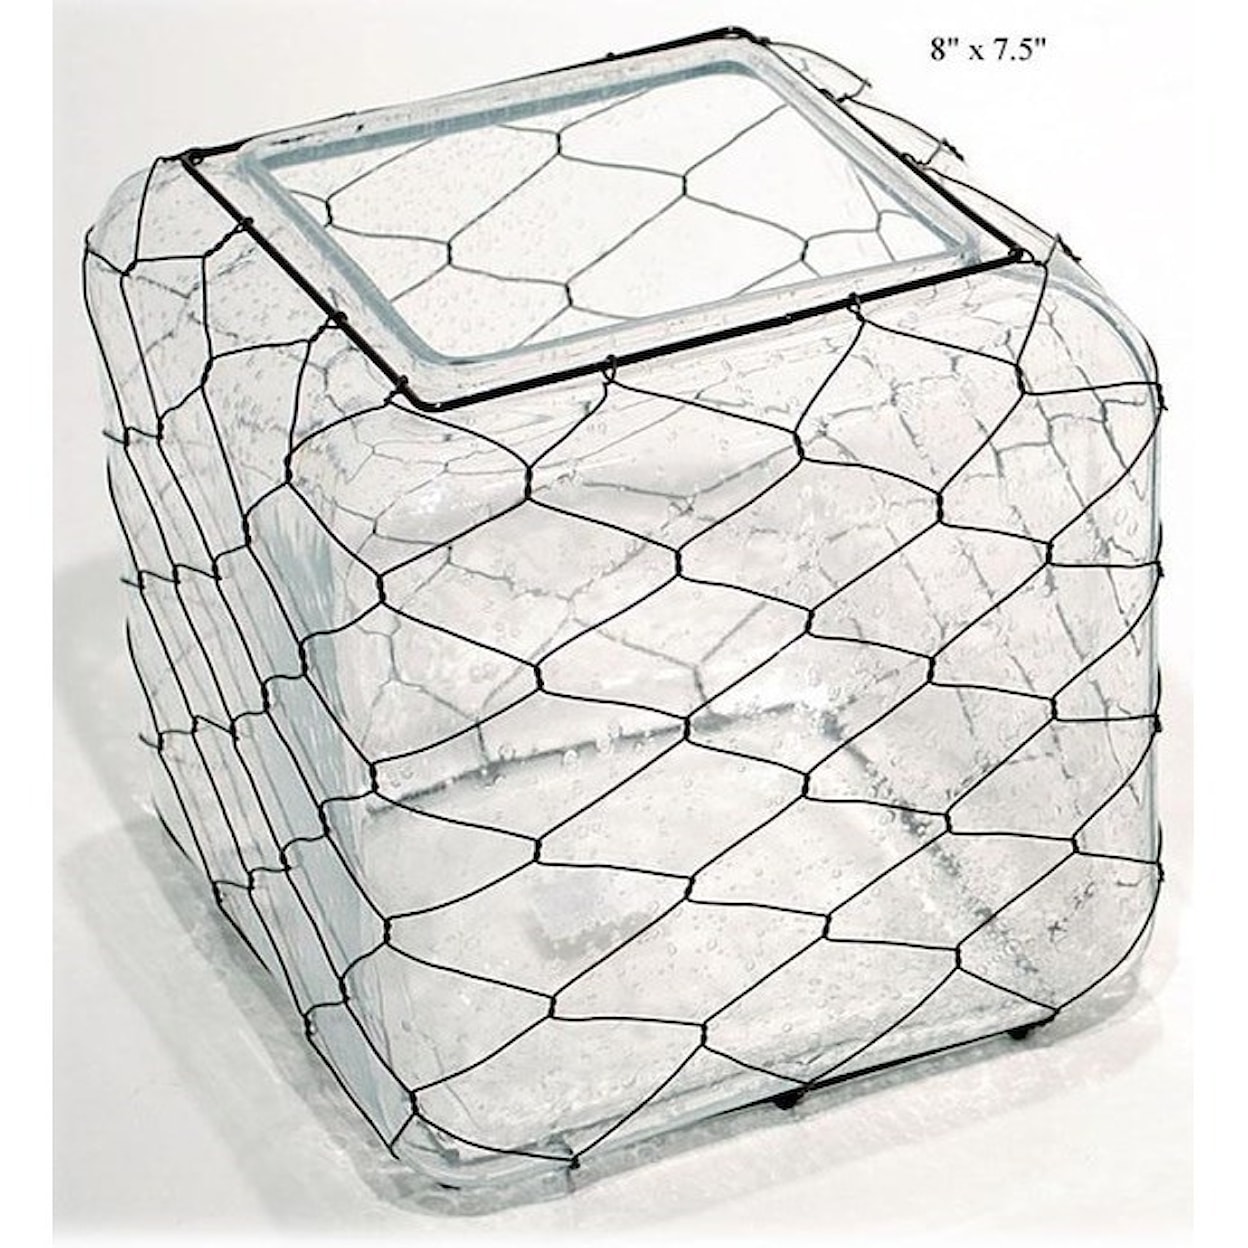 Will's Company Accents Square Vase with Wire - 8"